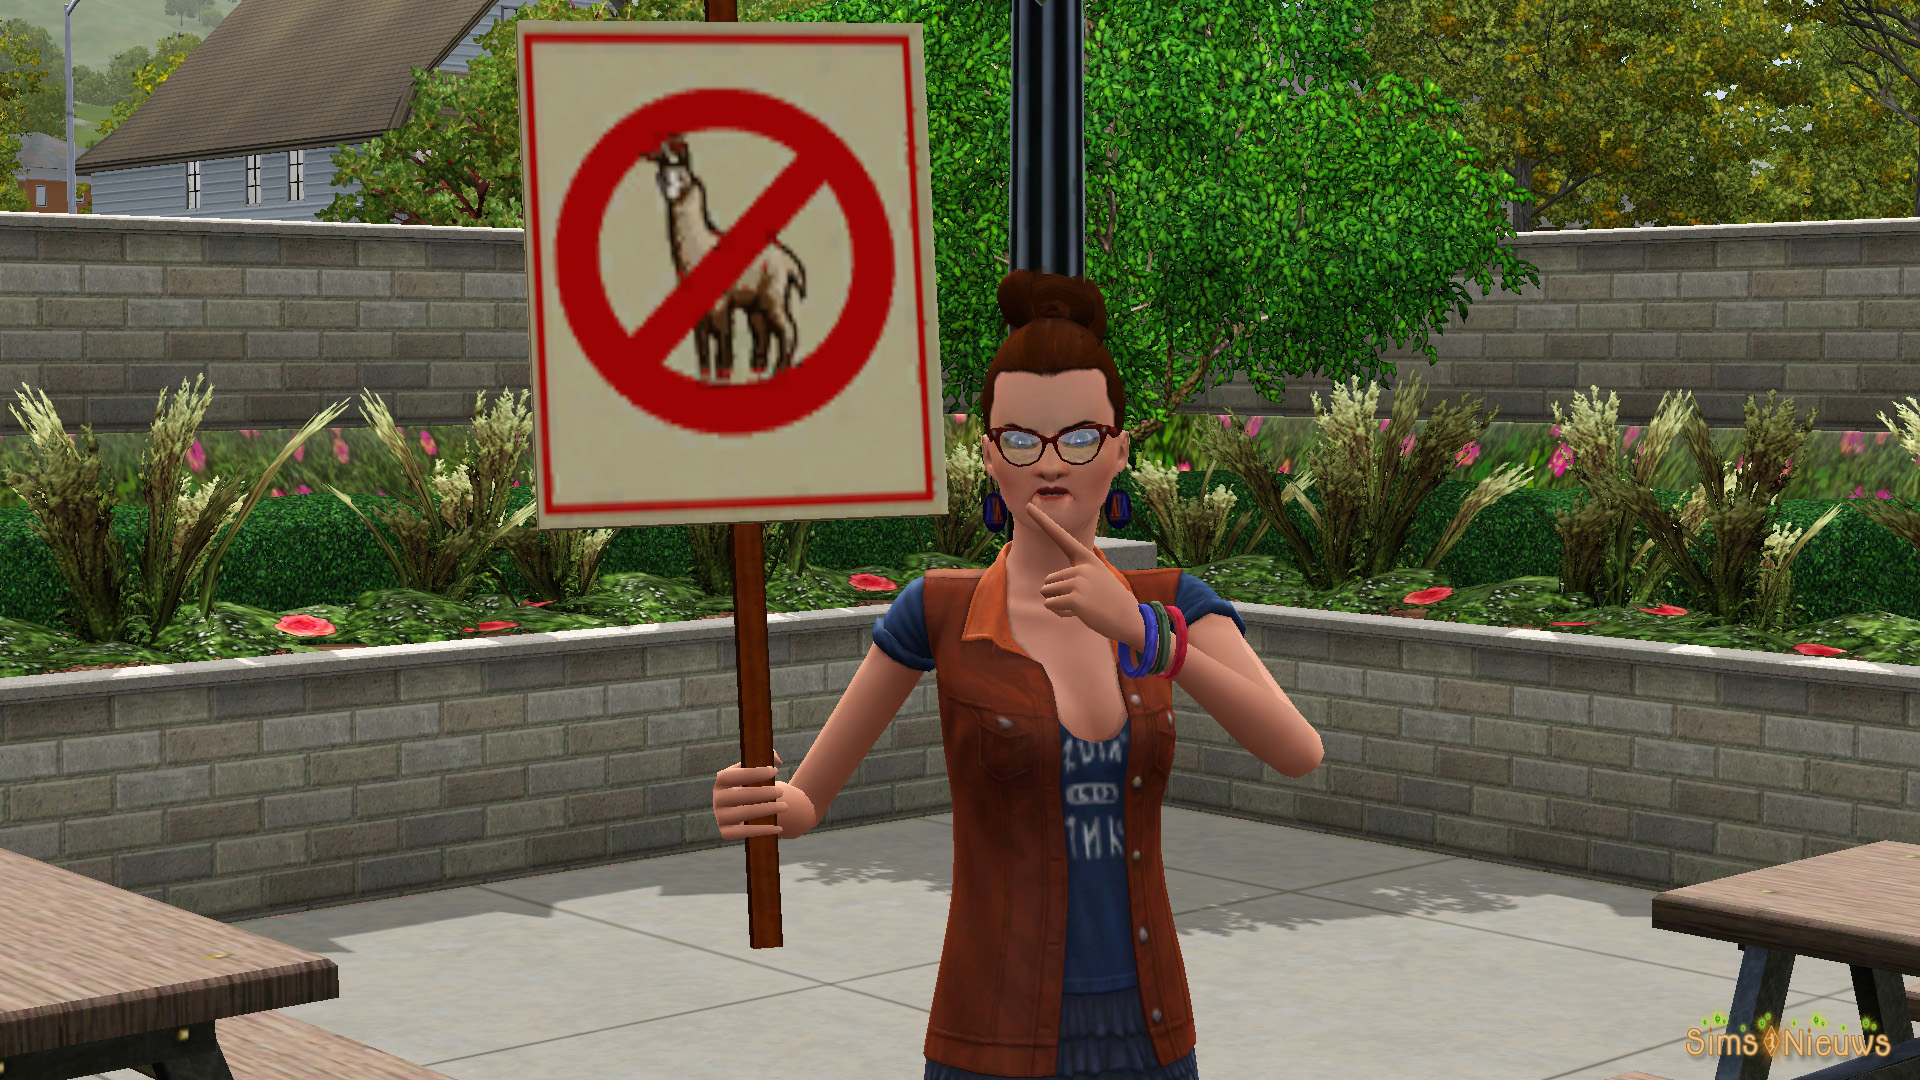 SN Review: The Sims University Life - Sims Nieuws